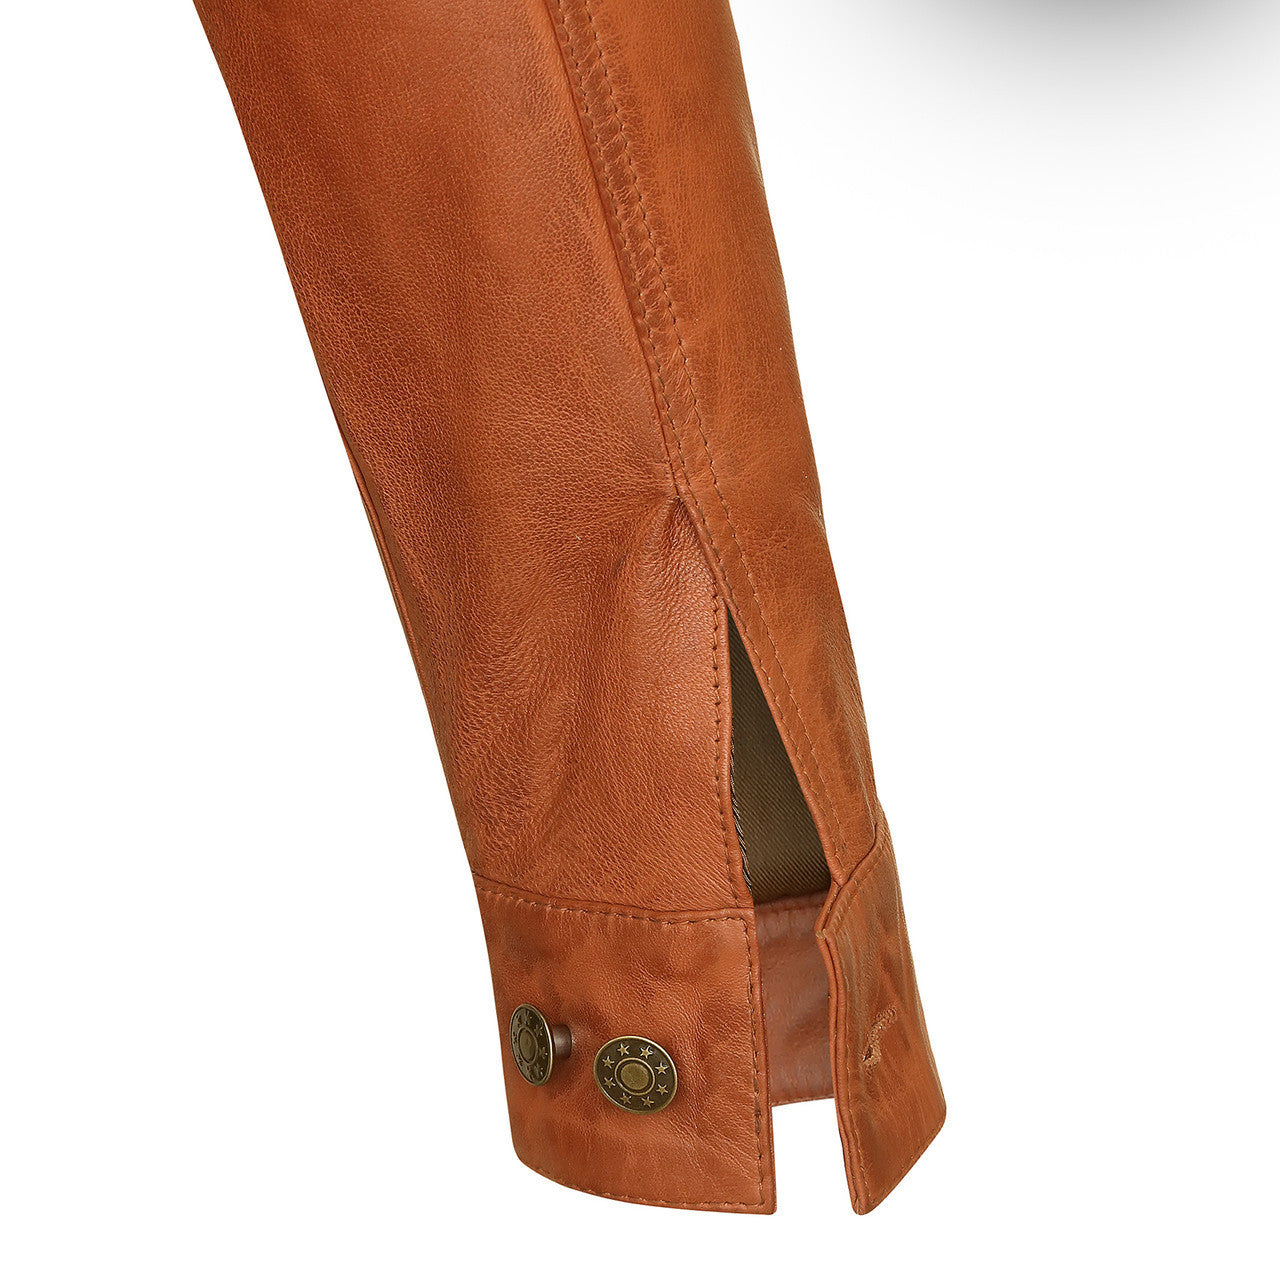 Vance-Leathers-VL555Br-Mens-Austin-Brown-Motorcycle-Trucker-Leather-Jacket-detail-view